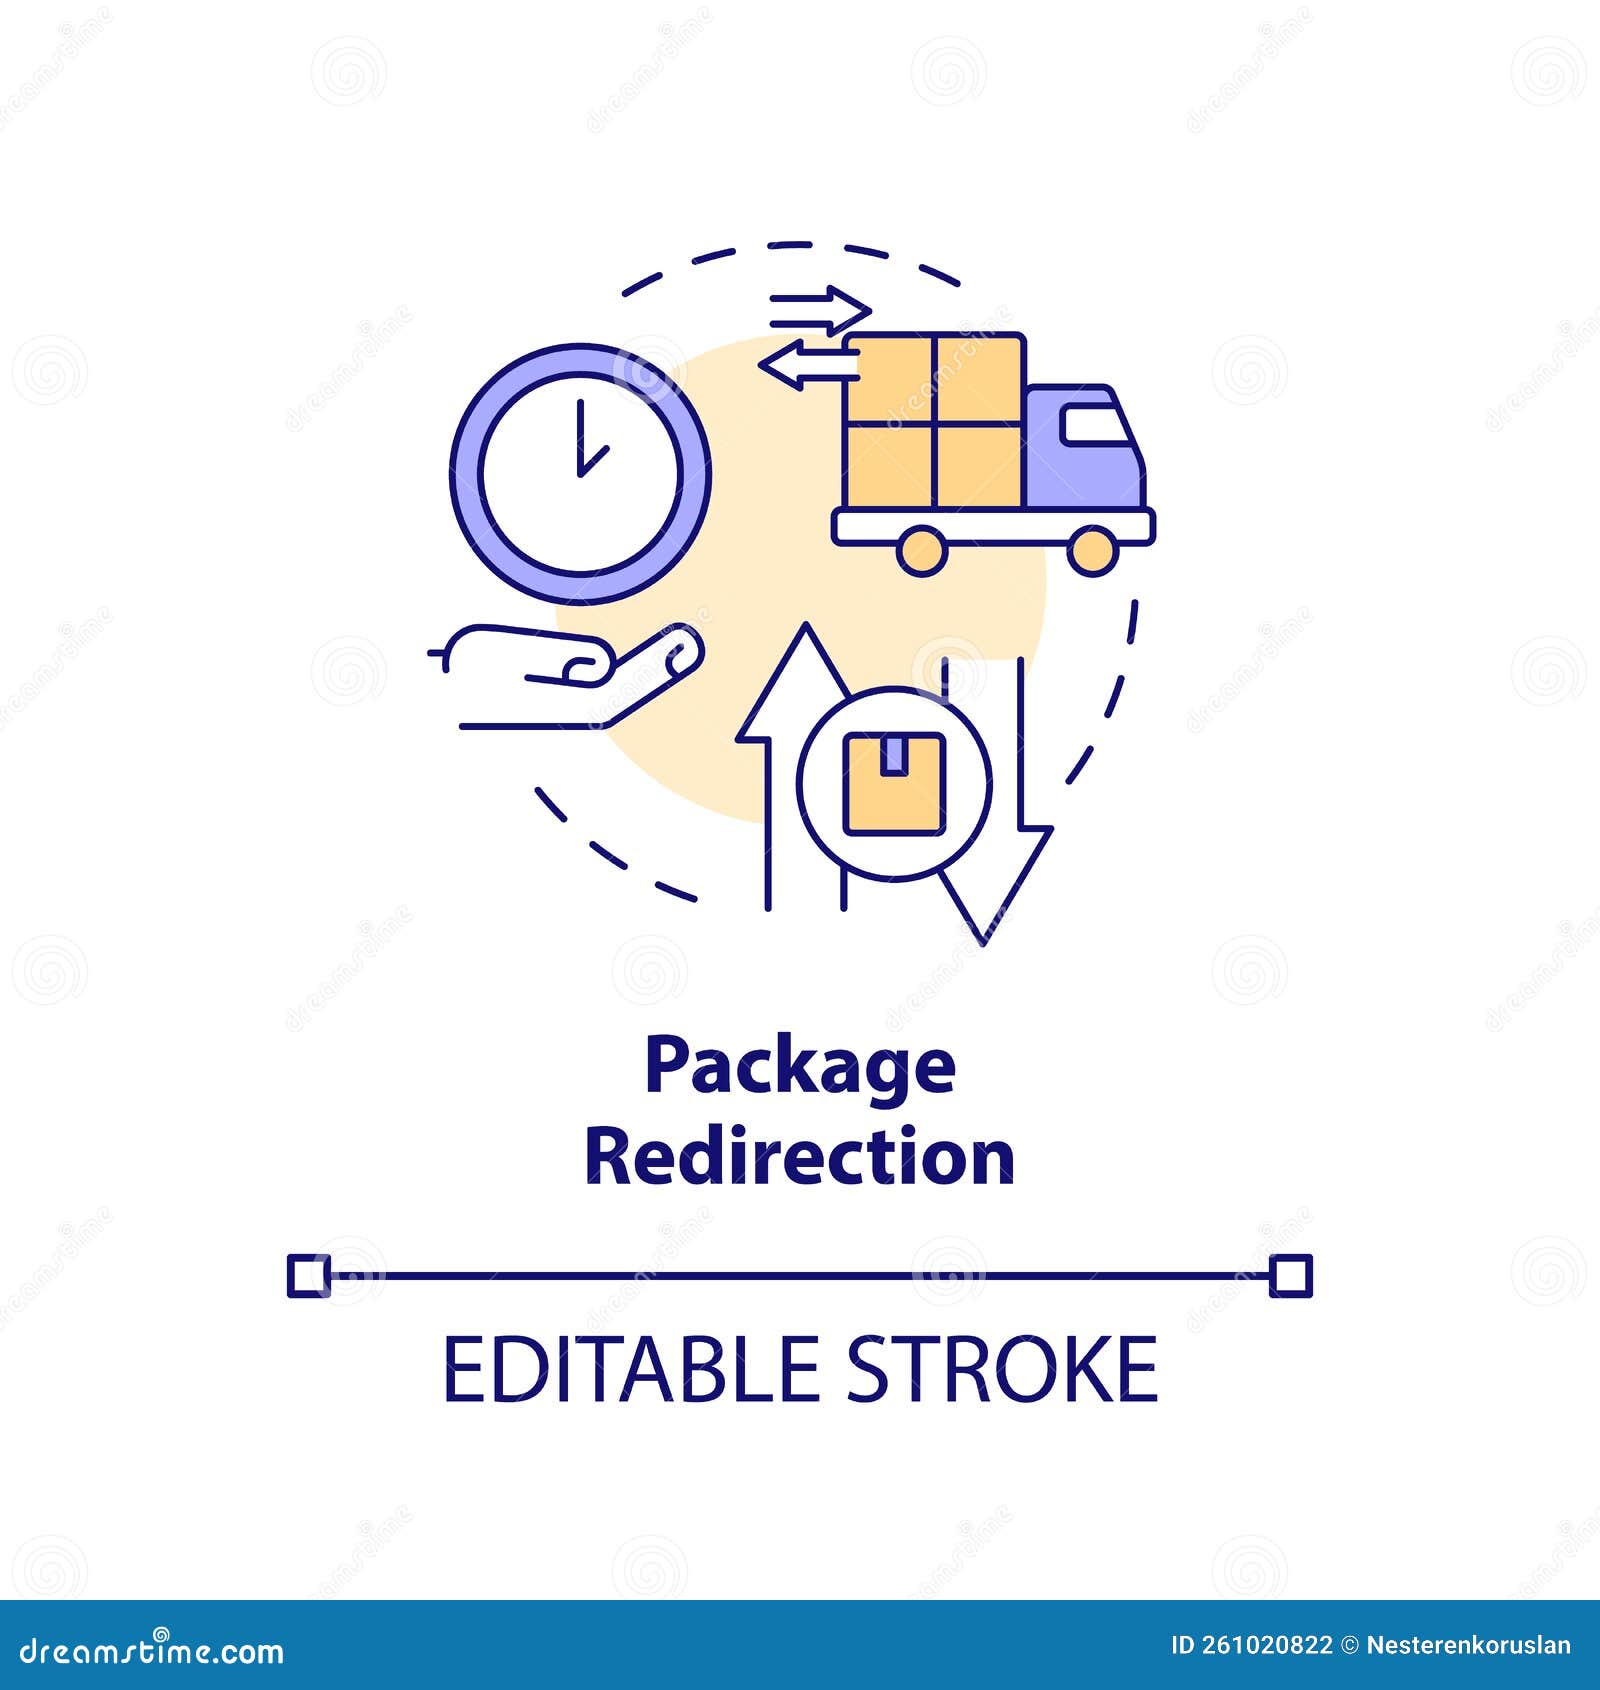 package redirection concept icon